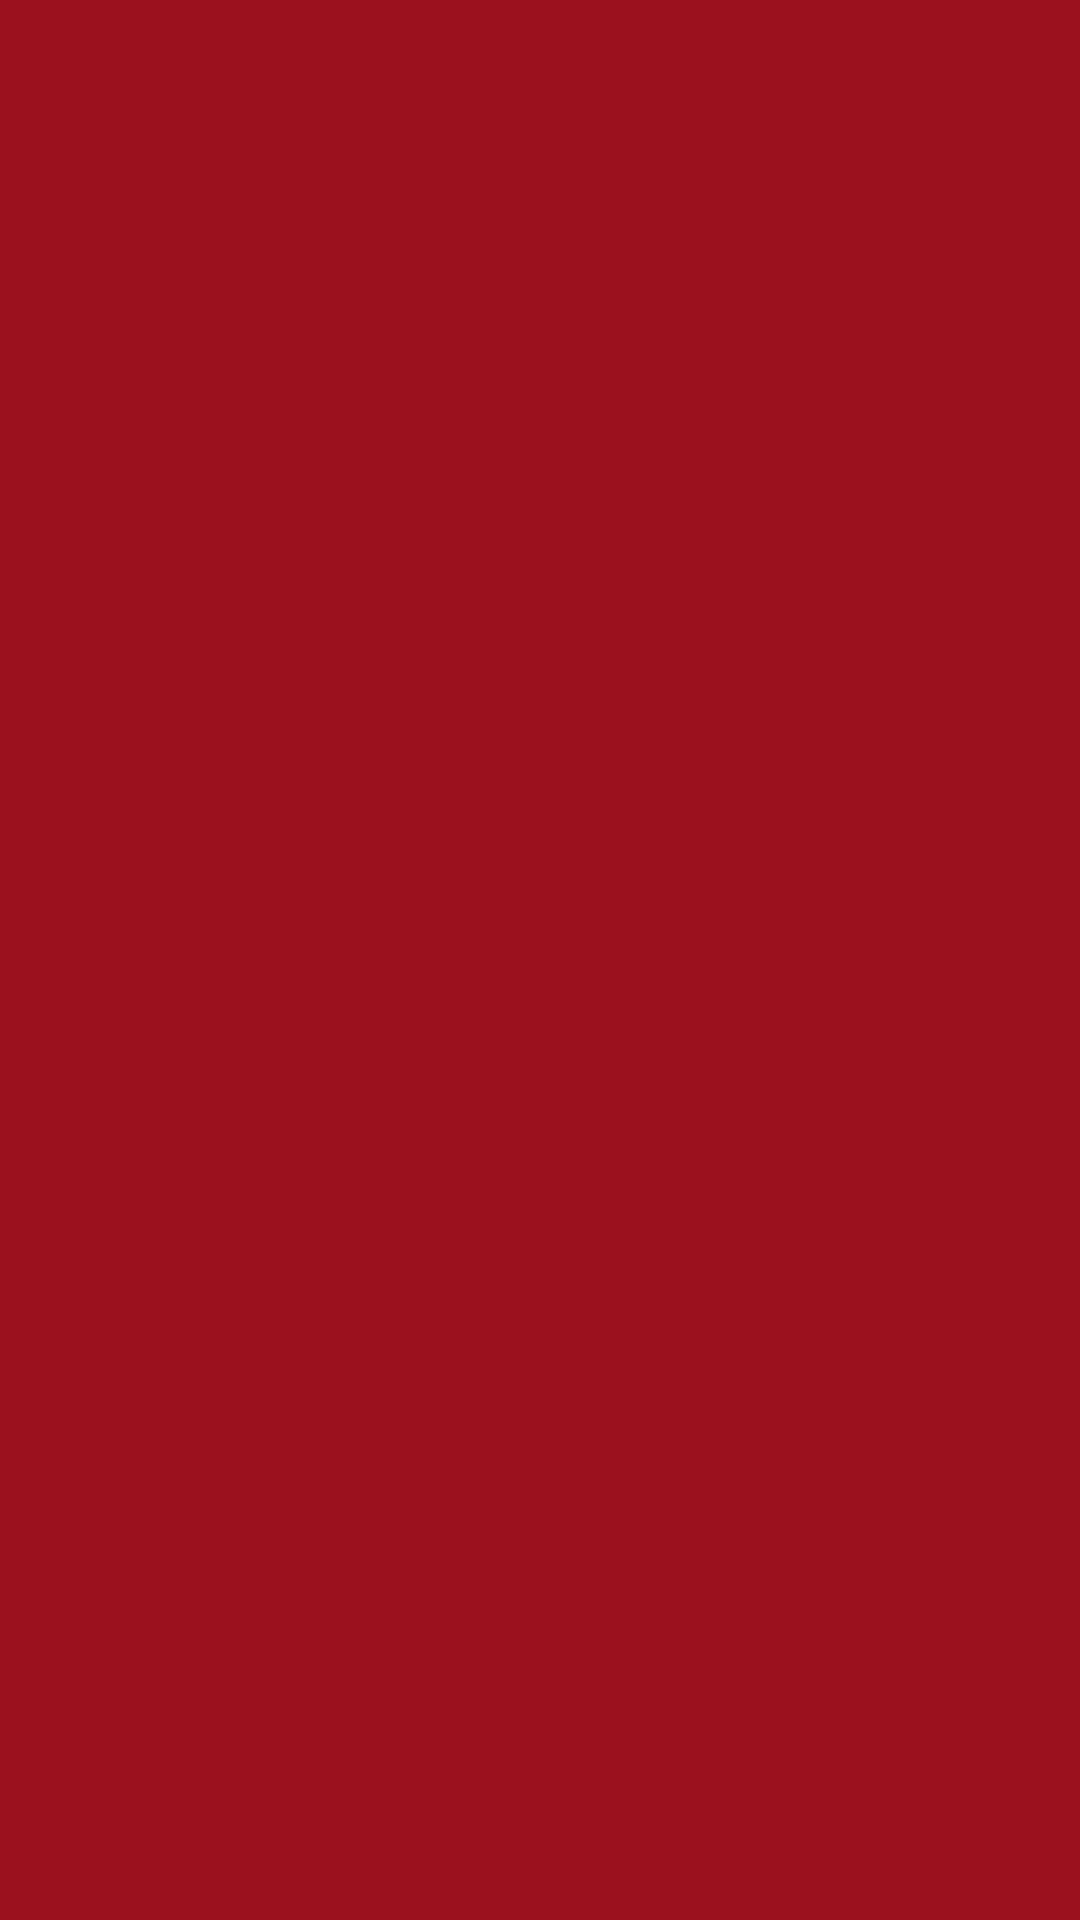 1080x1920 Ruby Red Solid Color Background